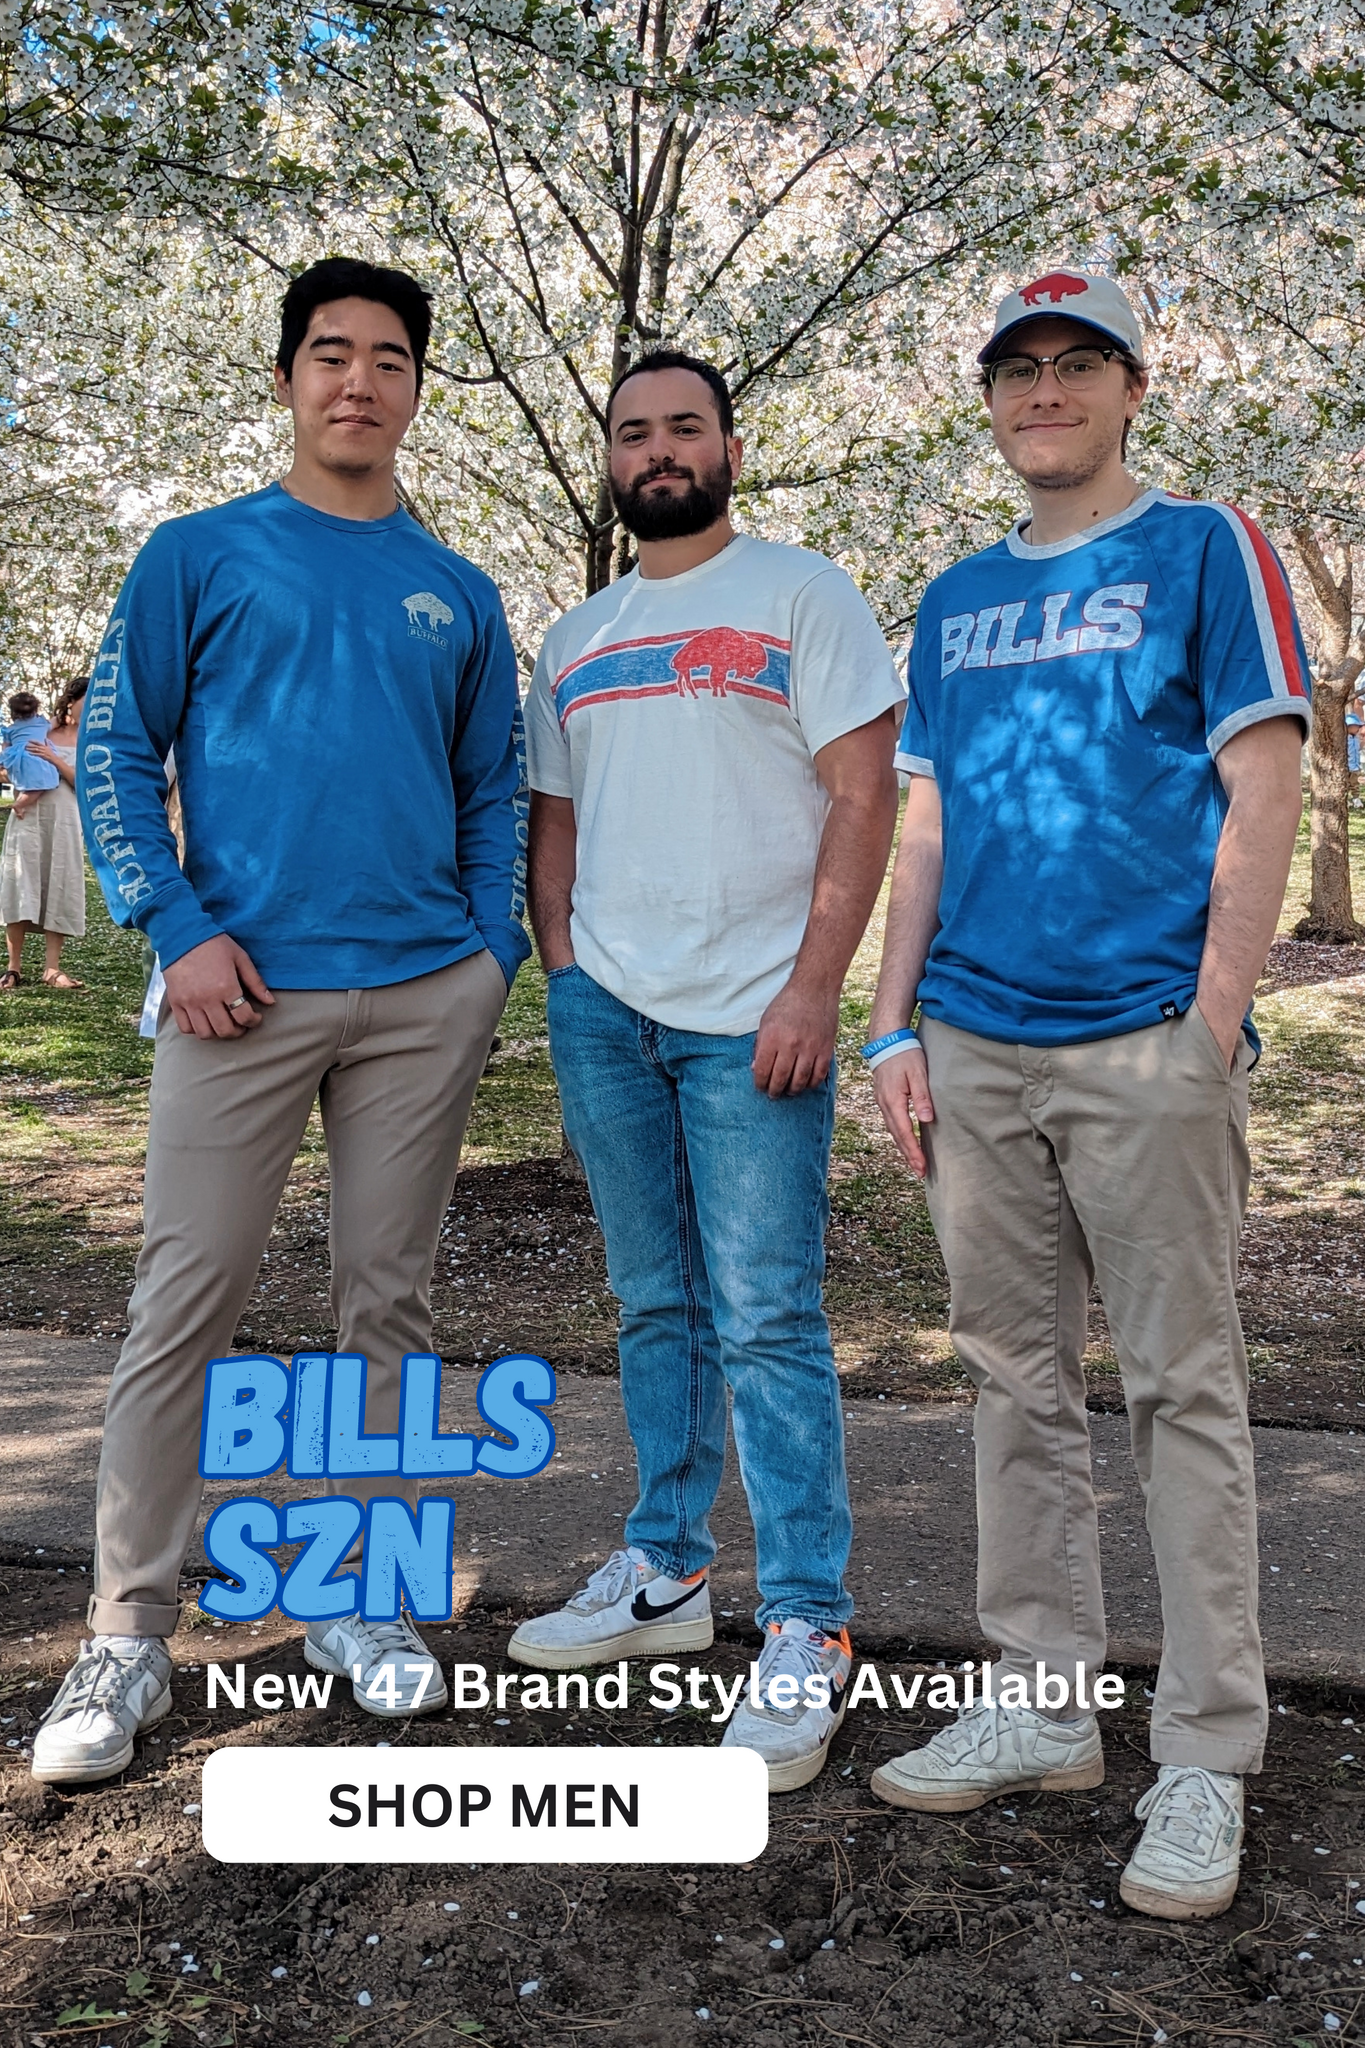 The BFLO Store - Official Retailer of the Buffalo Bills and Sabres